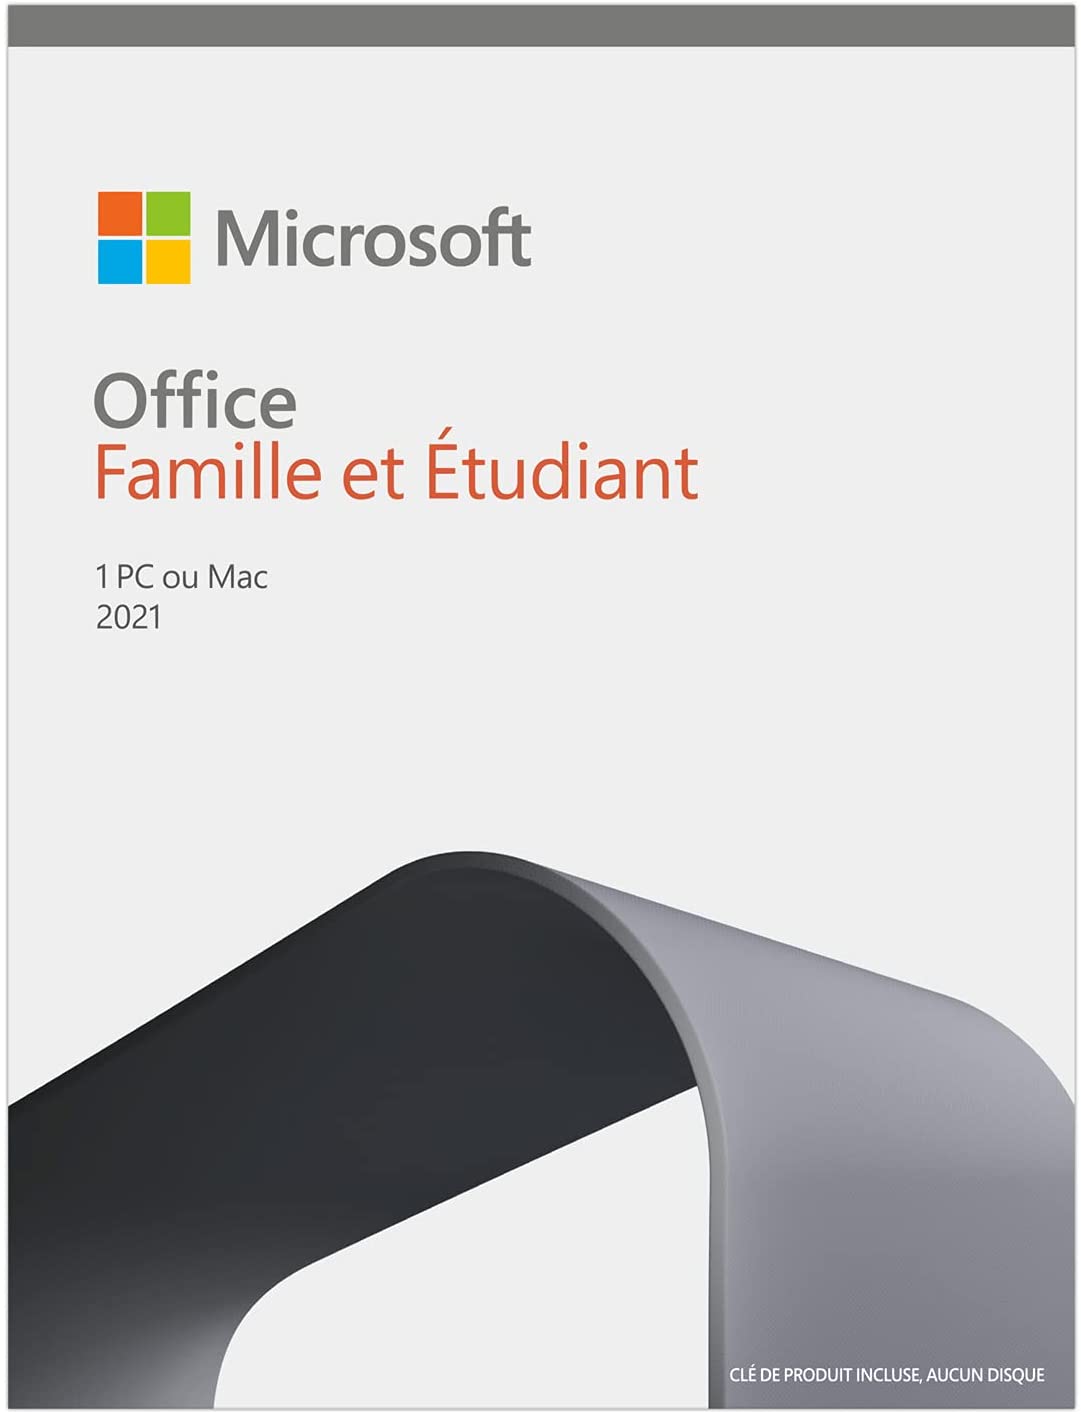 download microsoft office free for students